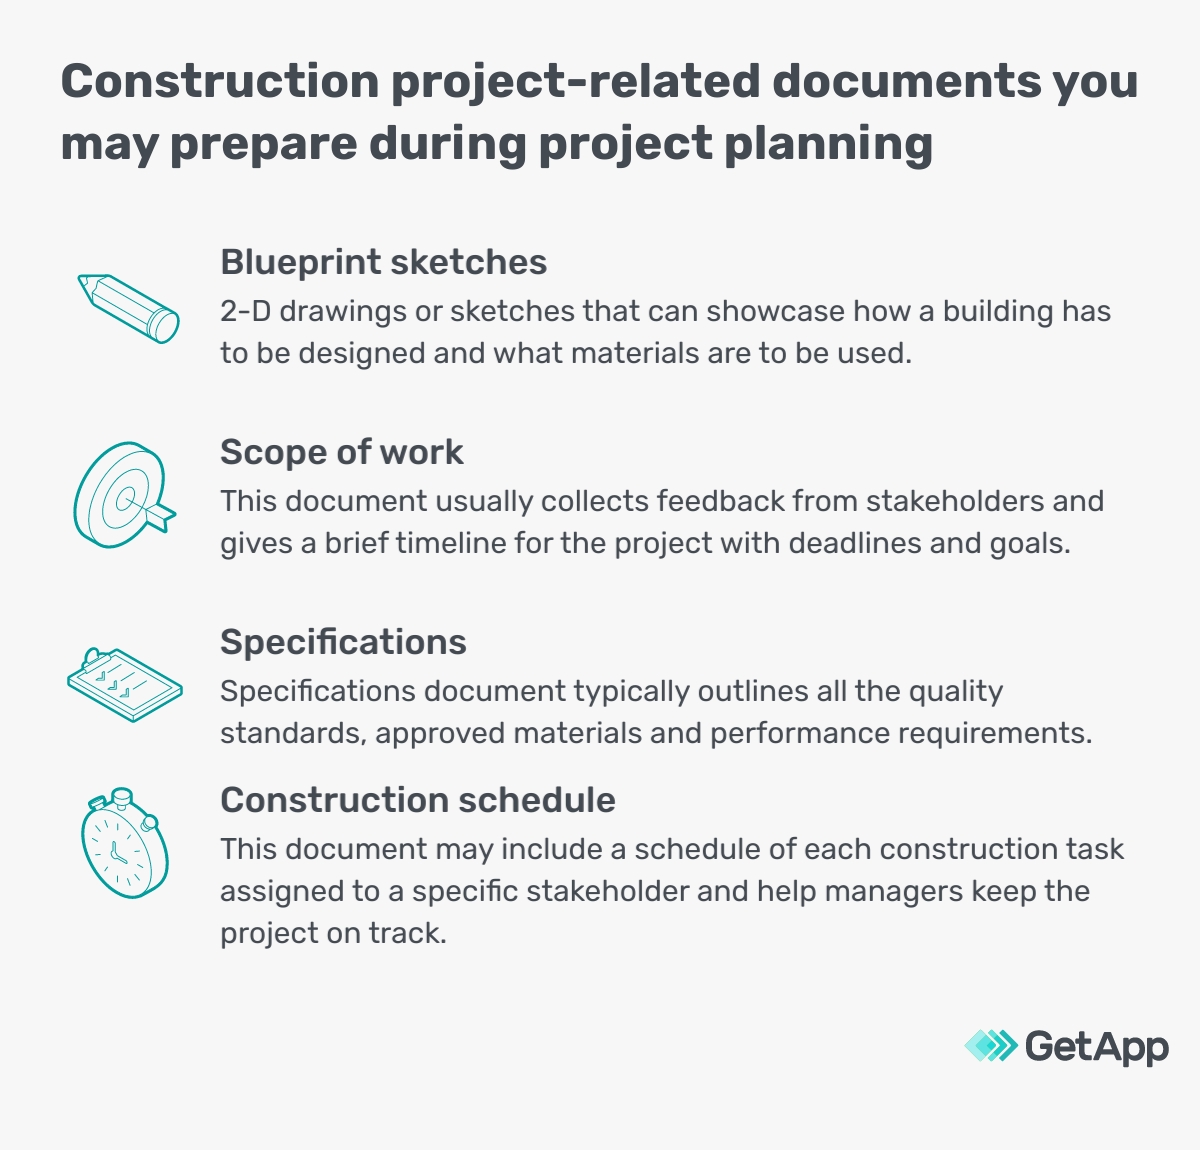 Documents you can create during construction project planning